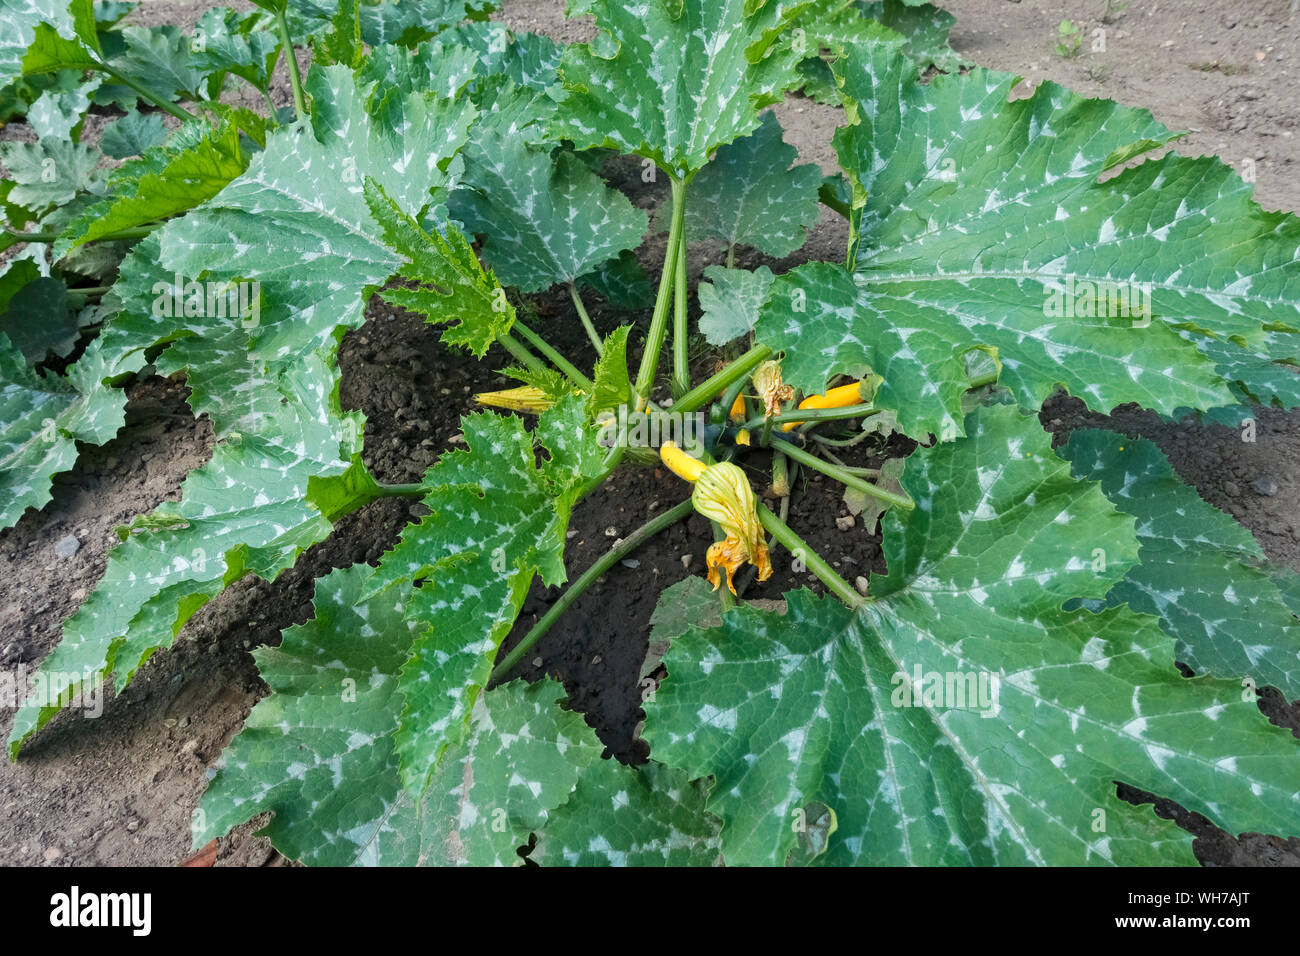 Courgettes Italian Striped courgette plant plants growing on an allotment garden plot in summer England UK United Kingdom GB Great Britain Stock Photo